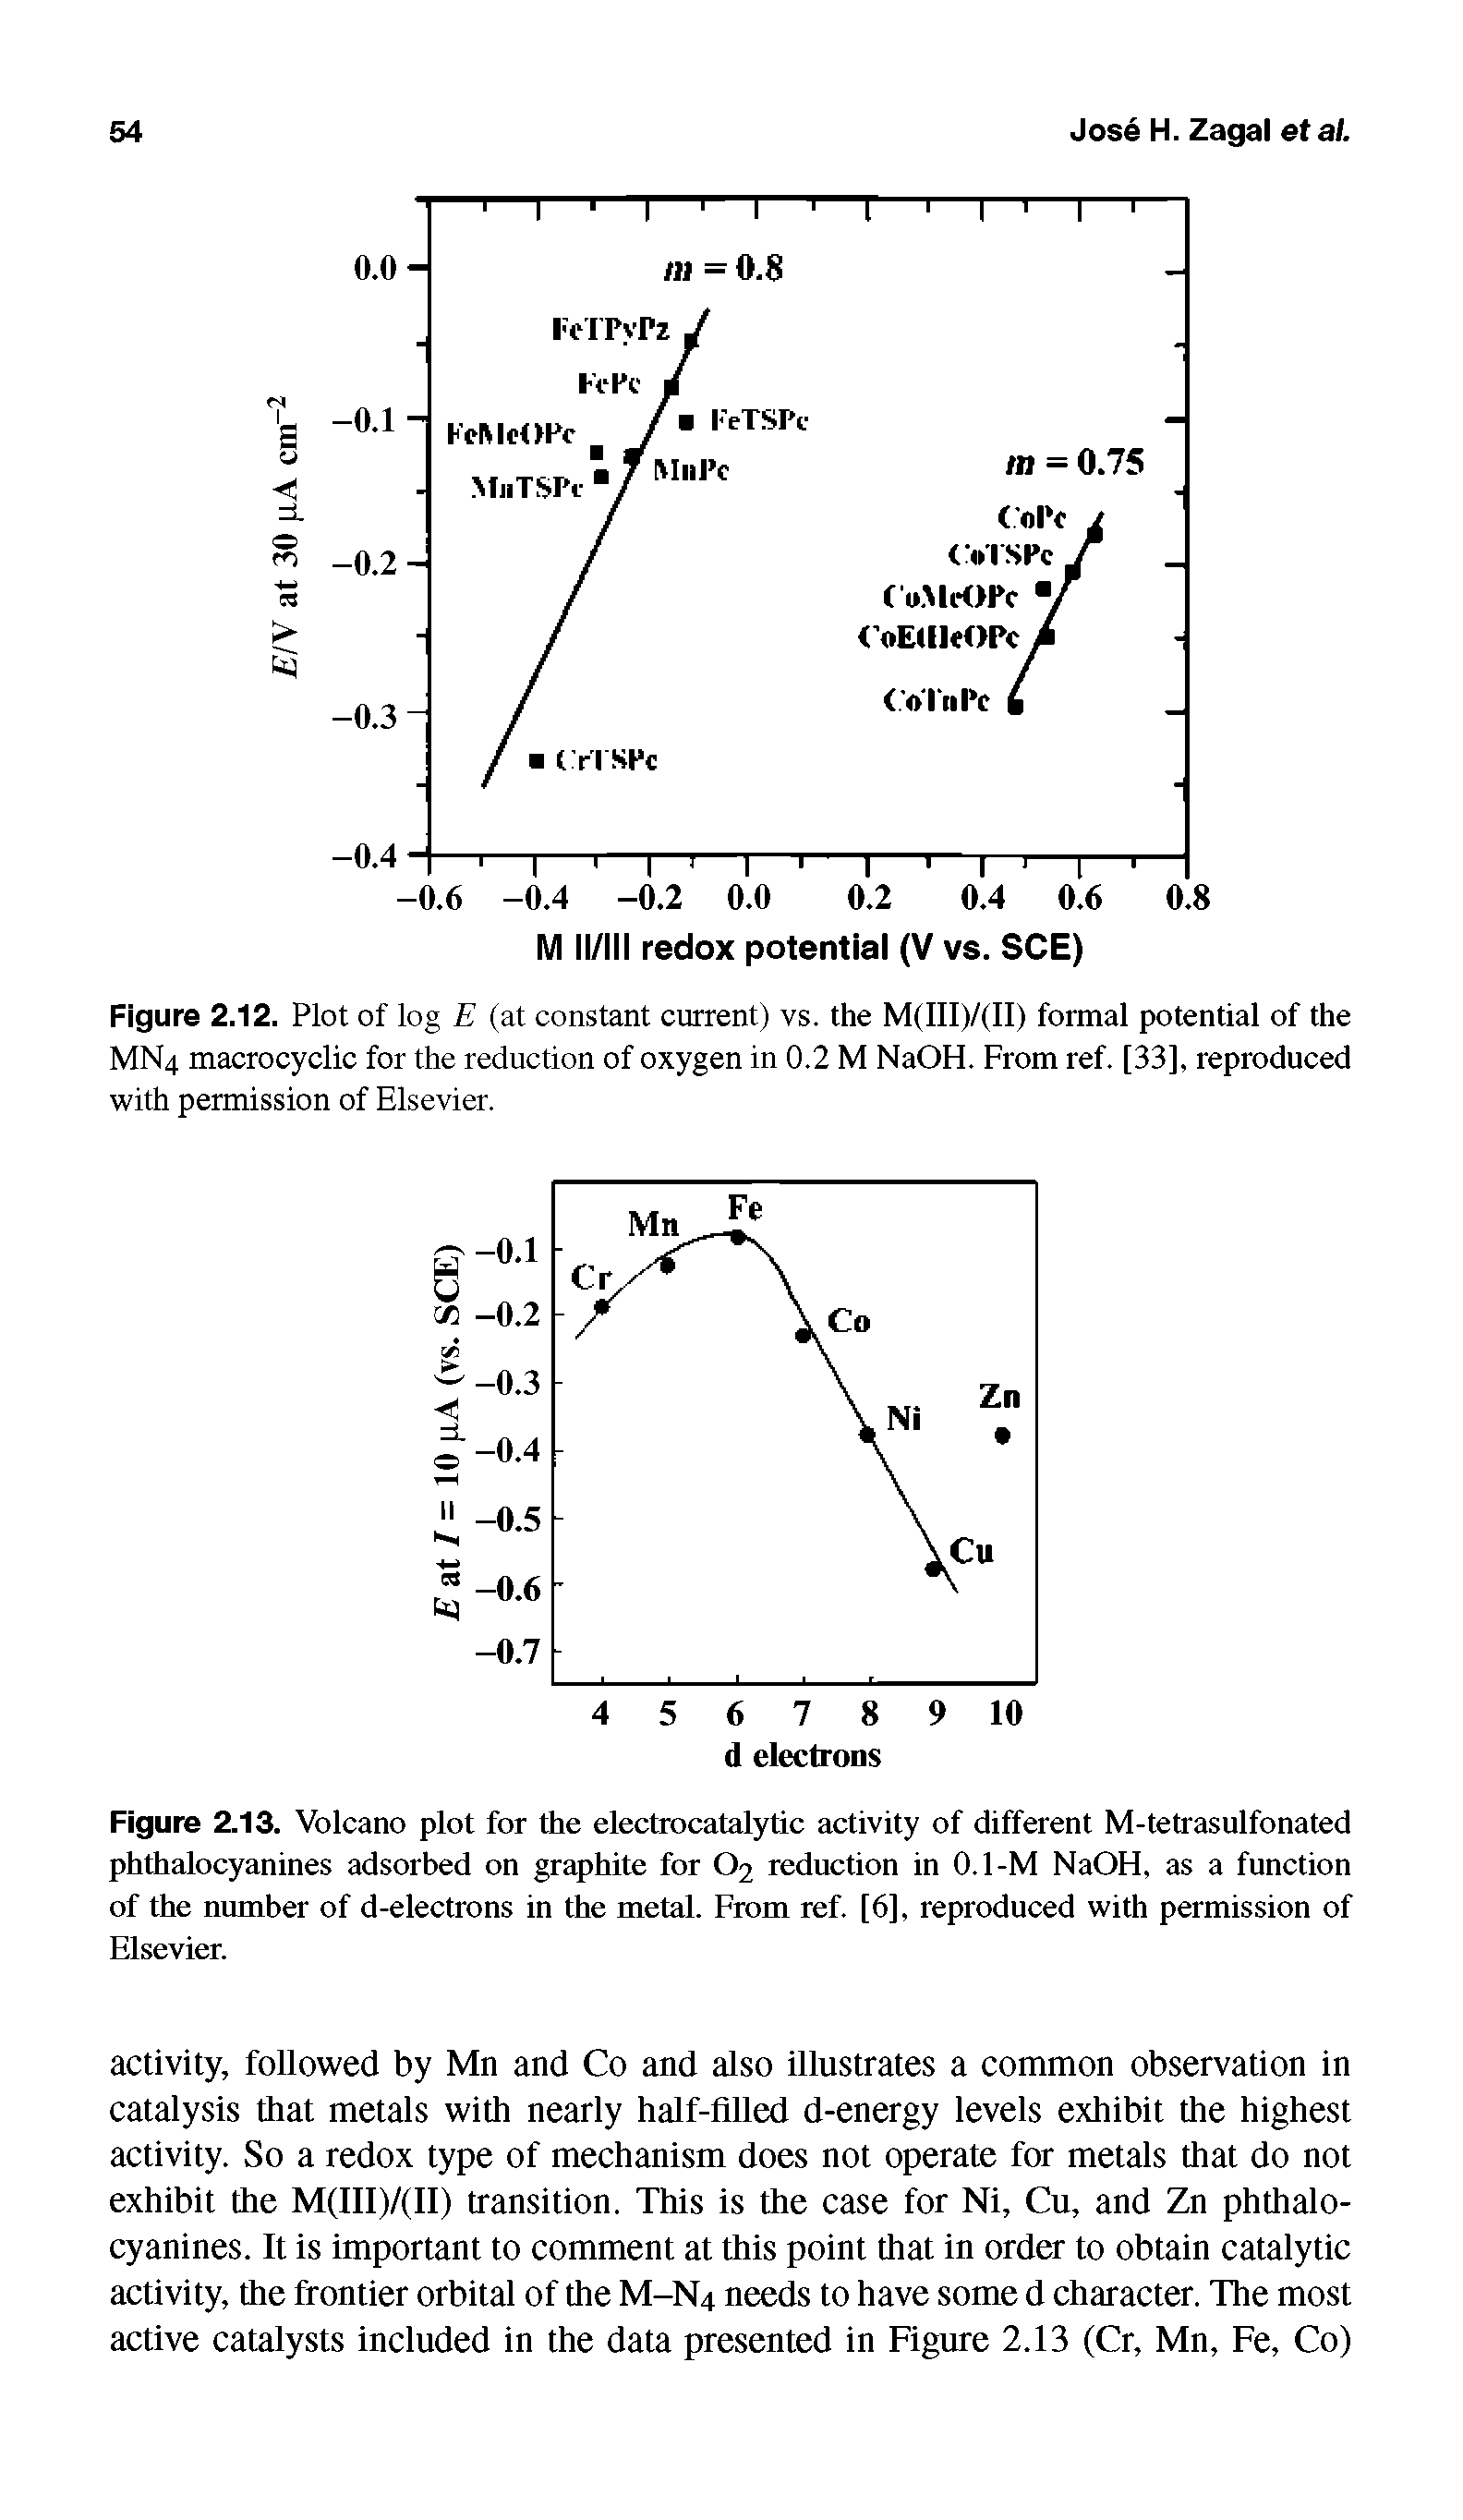 Figure 2.13. Volcano plot for the electrocatalytic activity of different M-tetrasulfonated phthalocyanines adsorbed on graphite for O2 reduction in 0.1-M NaOH, as a function of the number of d-electrons in the metal. From ref. [6], reproduced with permission of Elsevier.